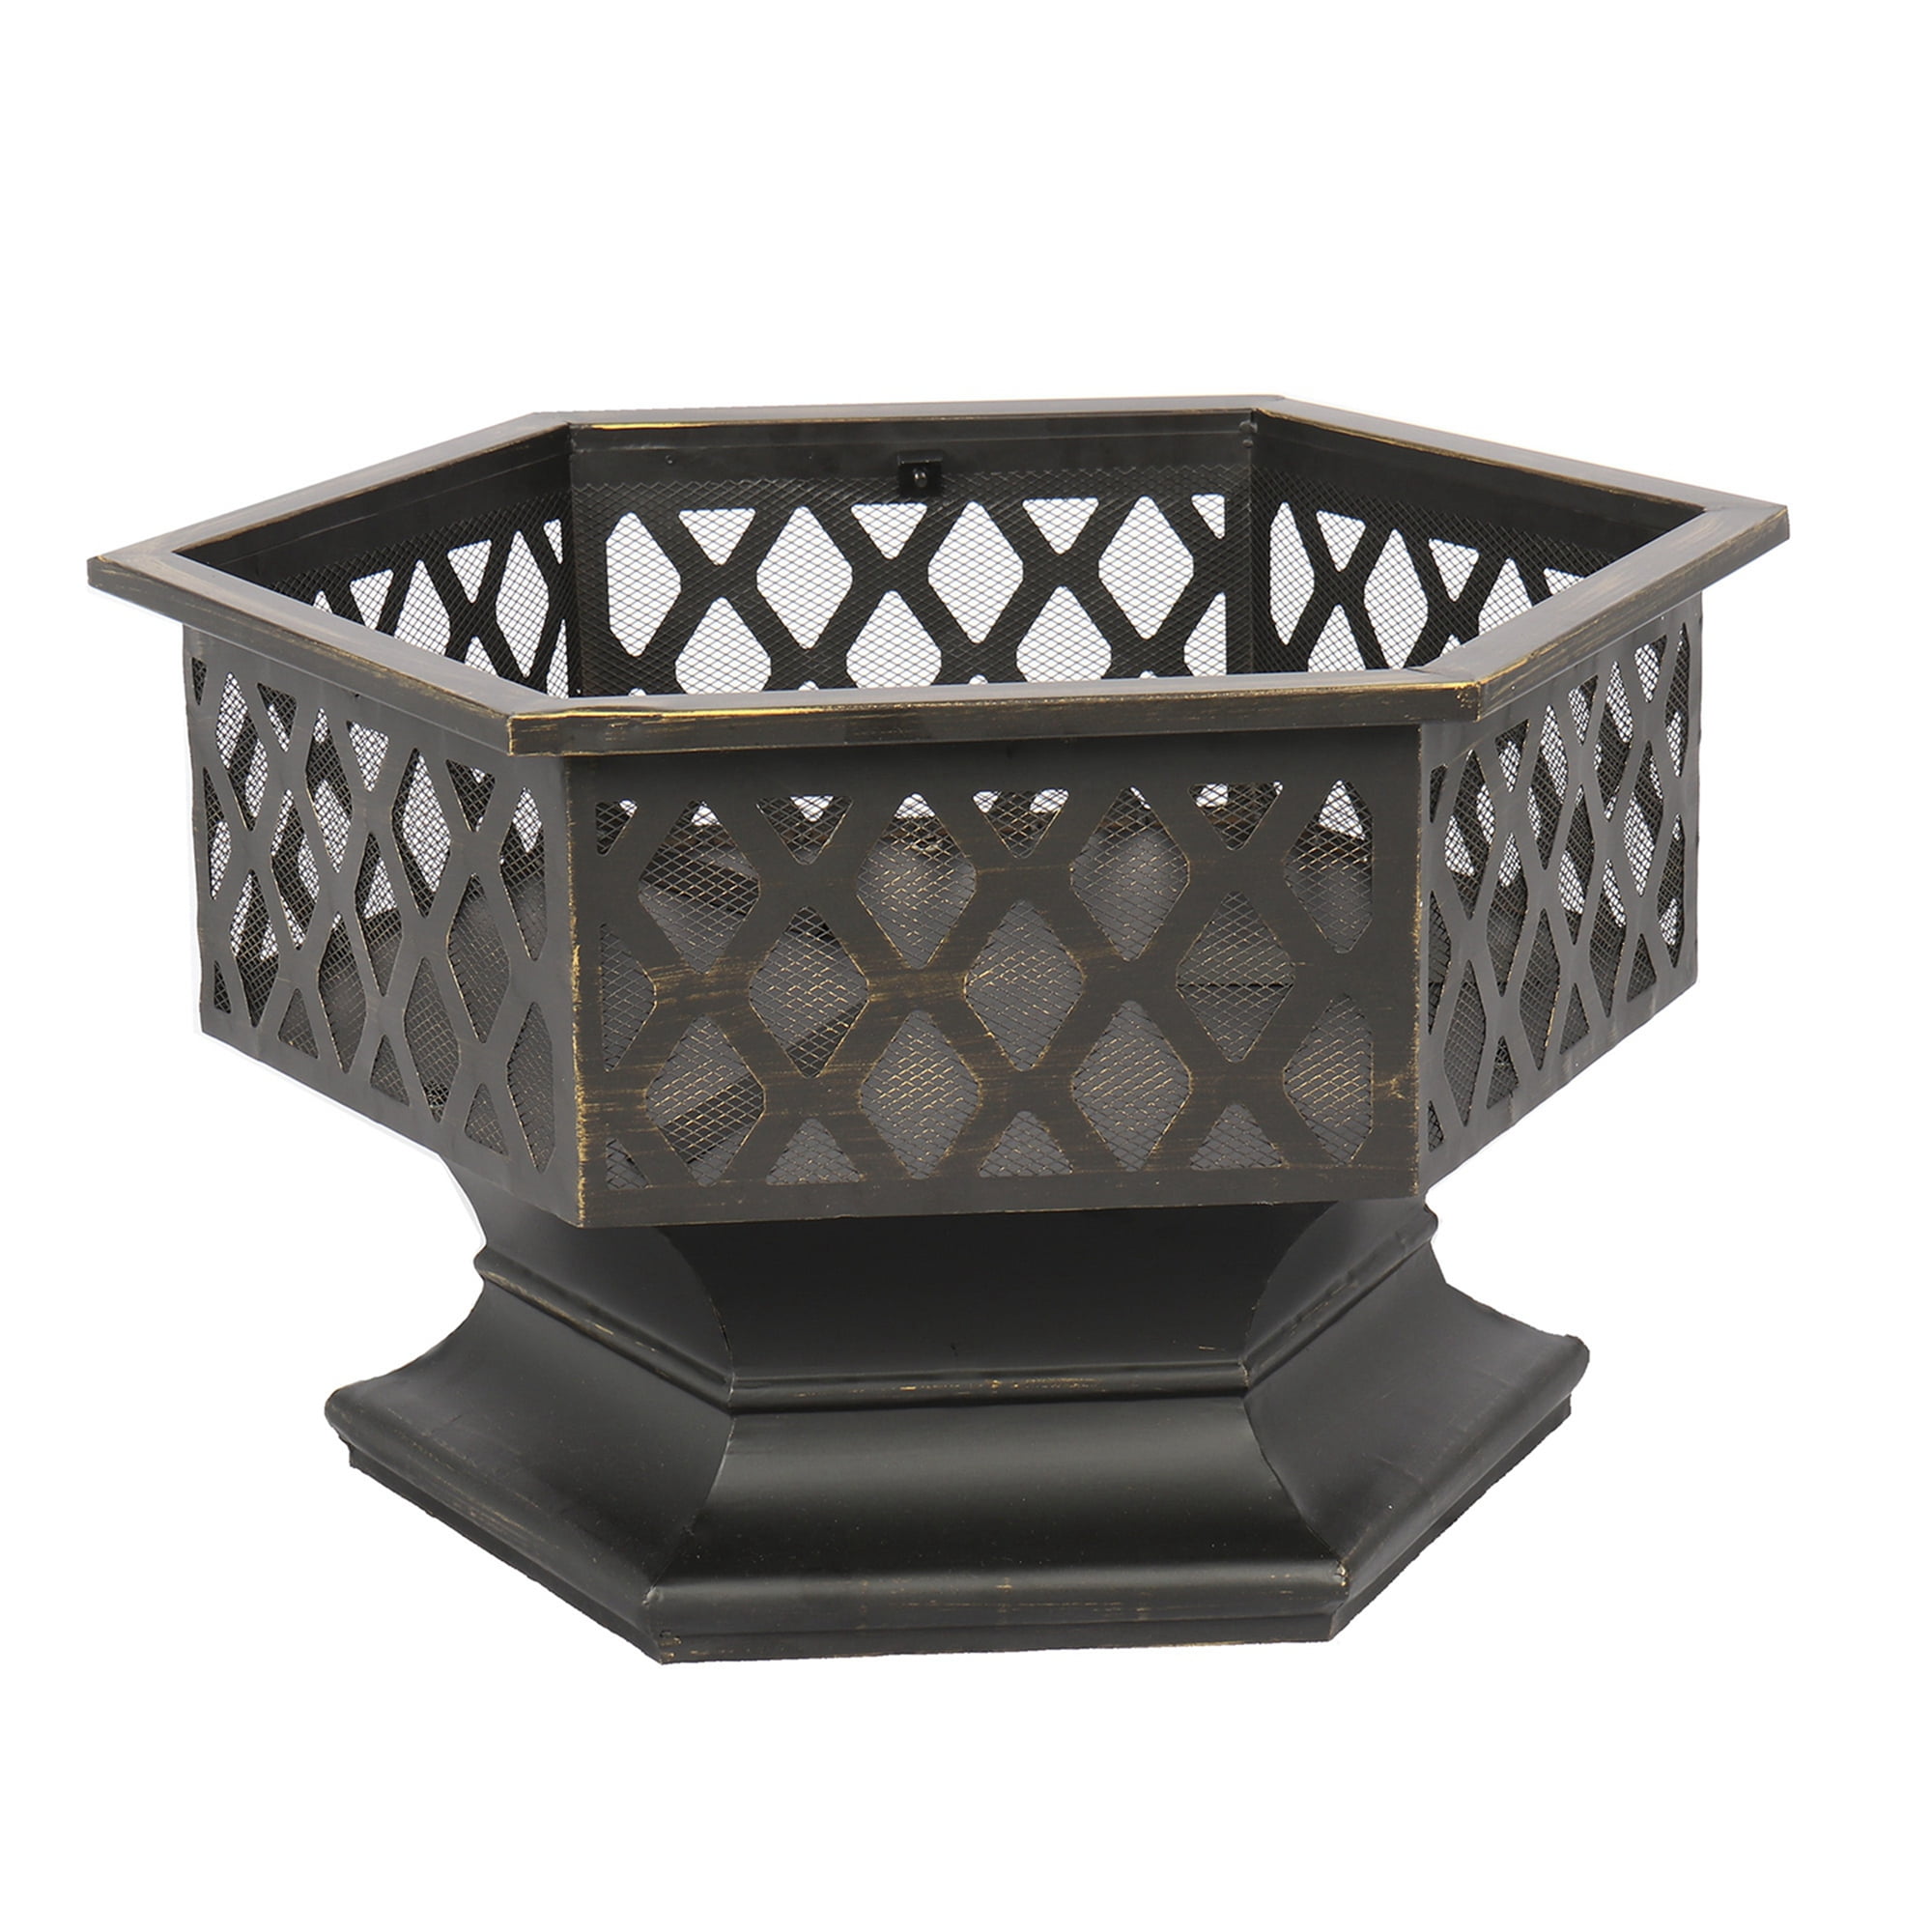 Loalirando Fire Pit With Spark Screen, Hex Fire Pit Cover